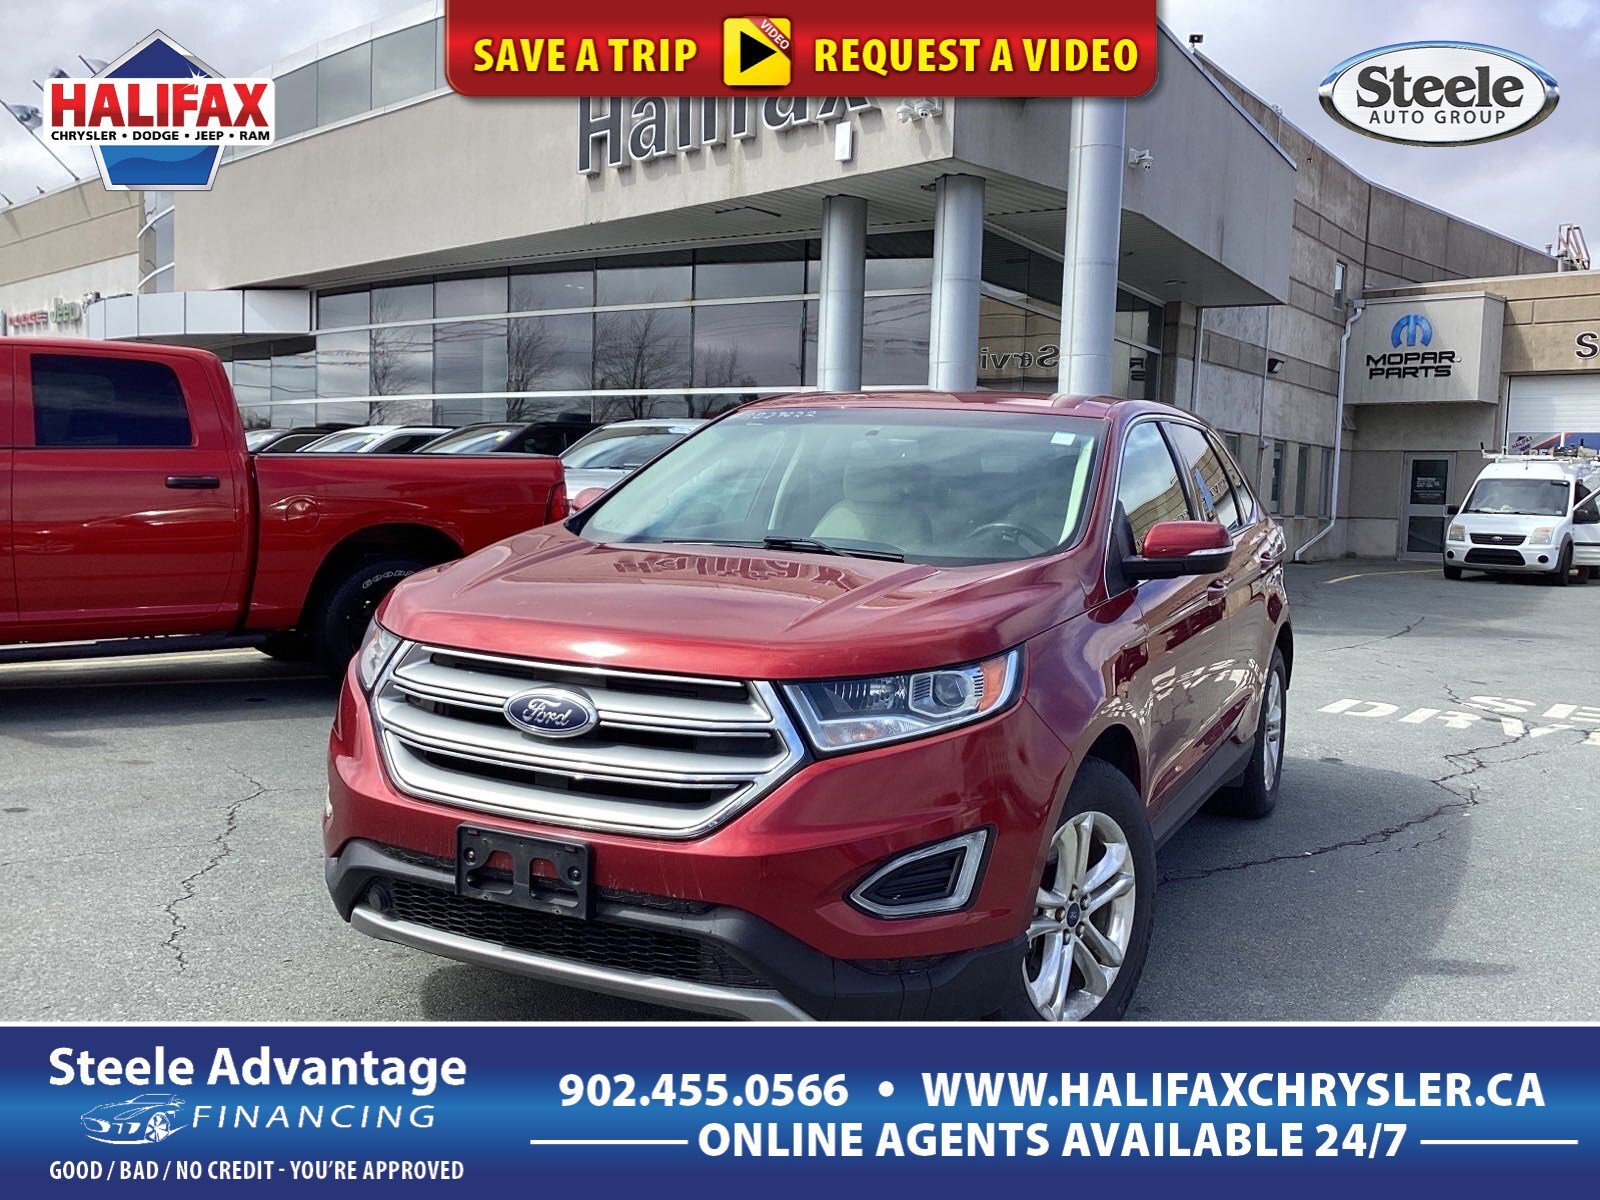 2015 Ford Edge SEL - AWD, LOW KM, HEATED SEATS, BACK UP CAMERA, P